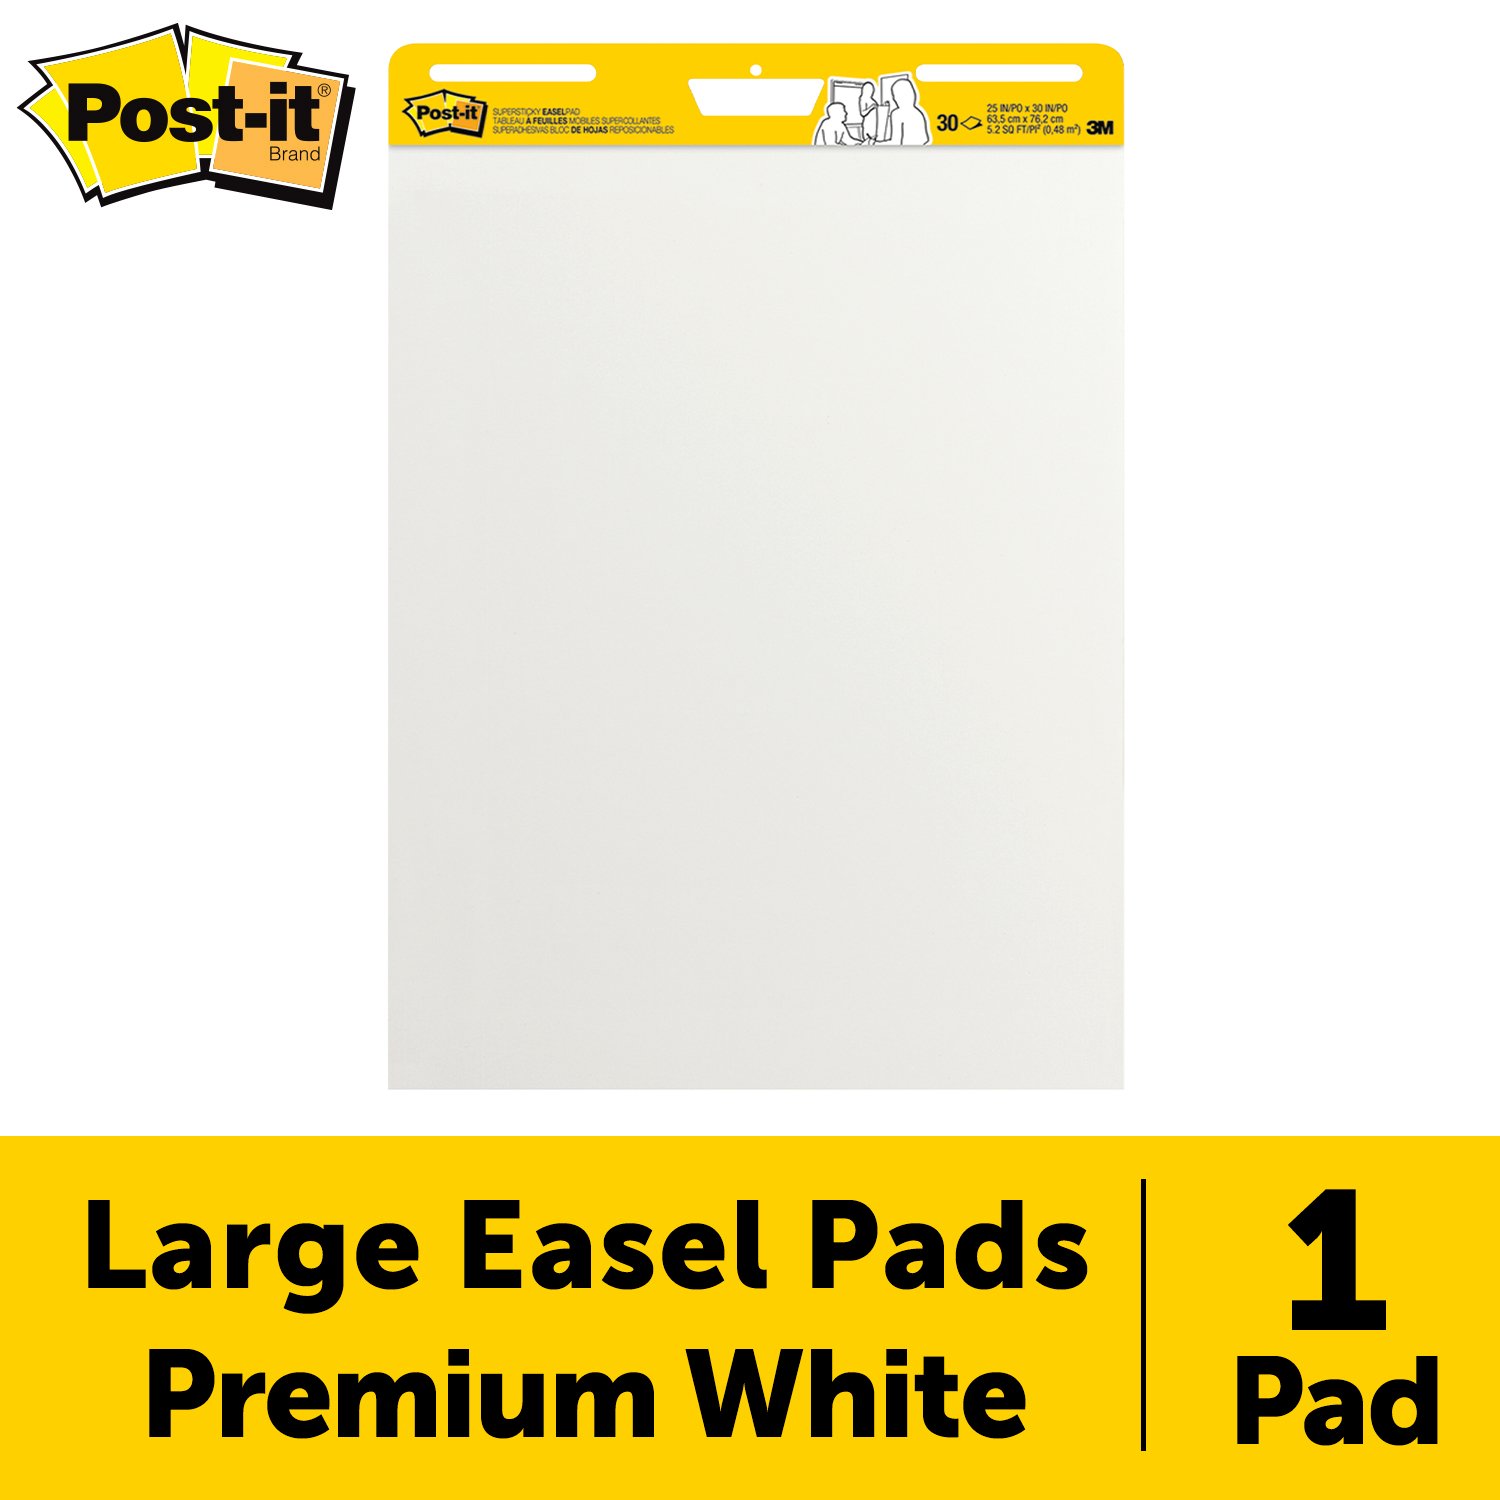 7100085038 - Post-it Super Sticky Easel Pad 559SS, 25 in. x 30 in.